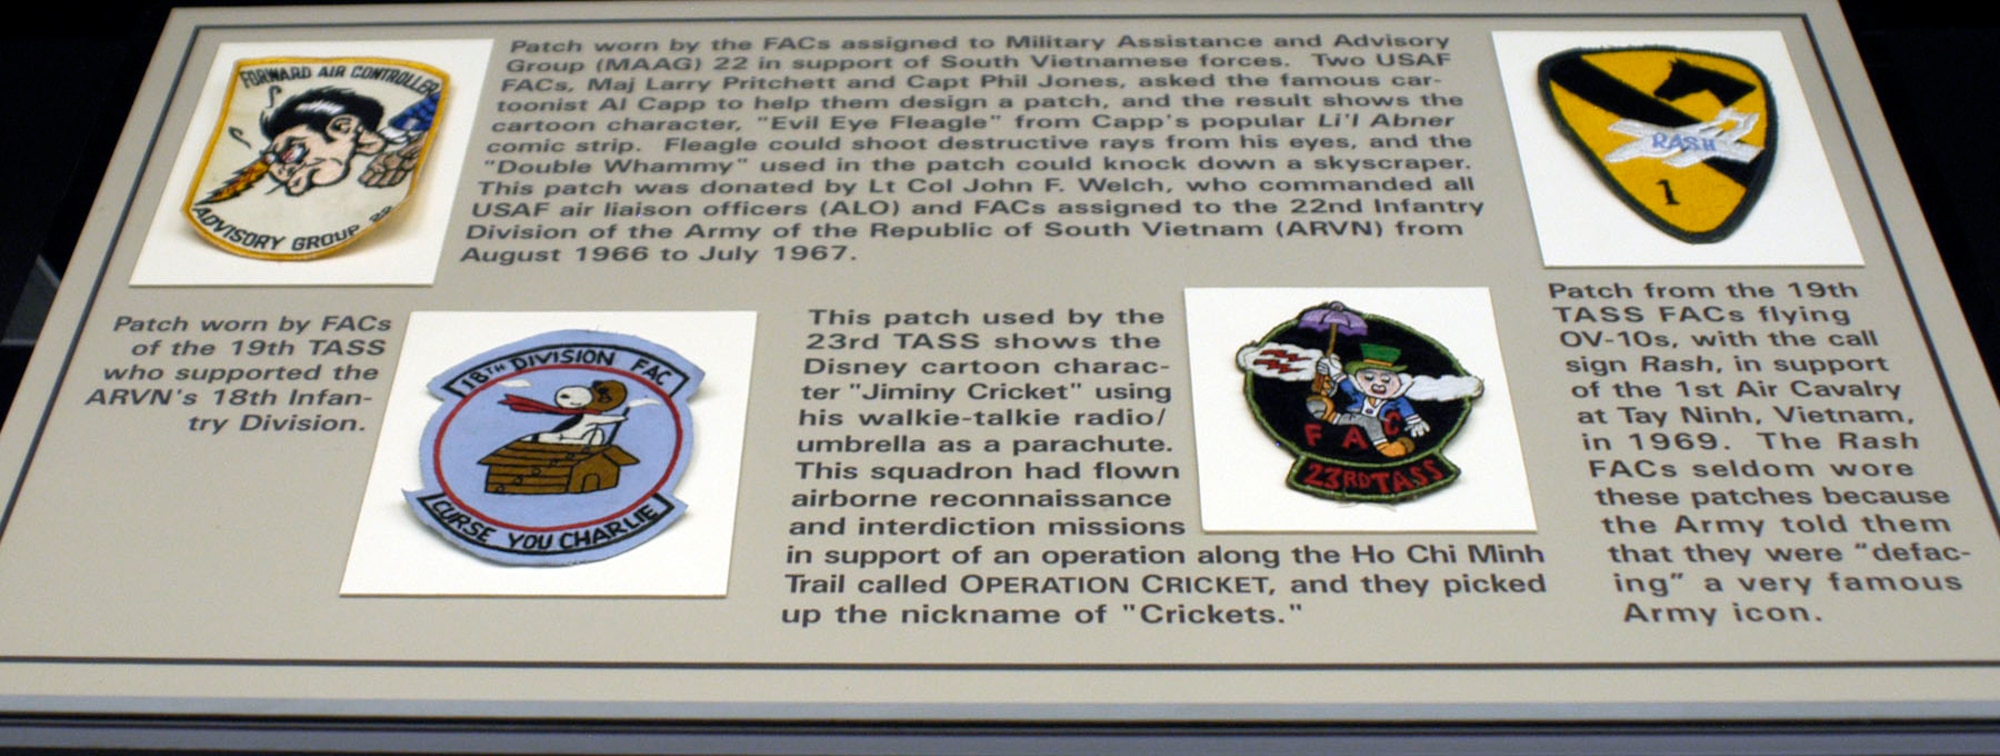 DAYTON, Ohio - (top left) Patch worn by the FACs assigned to Military Assistance and Advisory Group (MAAG) 22 in support of South Vietnamese forces. Two USAF FACs, Maj. Larry Pritchett and Capt. Phil Jones, asked the famous cartoonist Al Capp to help them design a patch, and the result shows the cartoon character, “Evil Eye Fleagle” from Capp’s popular Li’l Abner comic strip. Fleagle could shoot destructive rays from his eyes, and the “Double Whammy” used in the patch could knock down a skyscraper.  This patch was donated by Lt. Col. John F. Welch, who commanded all USAF air liaison officers (ALO) and FACs assigned to the 22nd Infantry Division of the Army of the Republic of South Vietnam (ARVN) from August 1966 to July 1967. (bottom right) This patch used by the 23rd TASS shows the Disney cartoon character “Jiminy Cricket” using his Walkie-talkie/umbrella as a parachute. This squadron had flown airborne reconnaissance and interdiction missions in support of an operation along the Ho Chi Minh Trail called OPERATION CRICKET, and they picked up the nickname of “Crickets.” (bottom left) patch worn by FACs of the 19th TASS who supported the ARVN's 18th Infantry Division. (top right) Patch from the 19th TASS flying OA-10s with the call sign Rash in support of the 1st Air Calvary at Tay Ninh, Vietnam, in 1969. The Rash FACs seldom wore these patches because the Army told them that they were defacing a very famous Army icon. The patches are on display in the A Dangerous Business: Forward Air Control exhibit in the Southeast Asia War Gallery at the National Museum of the U.S. Air Force. (U.S. Air Force photo)